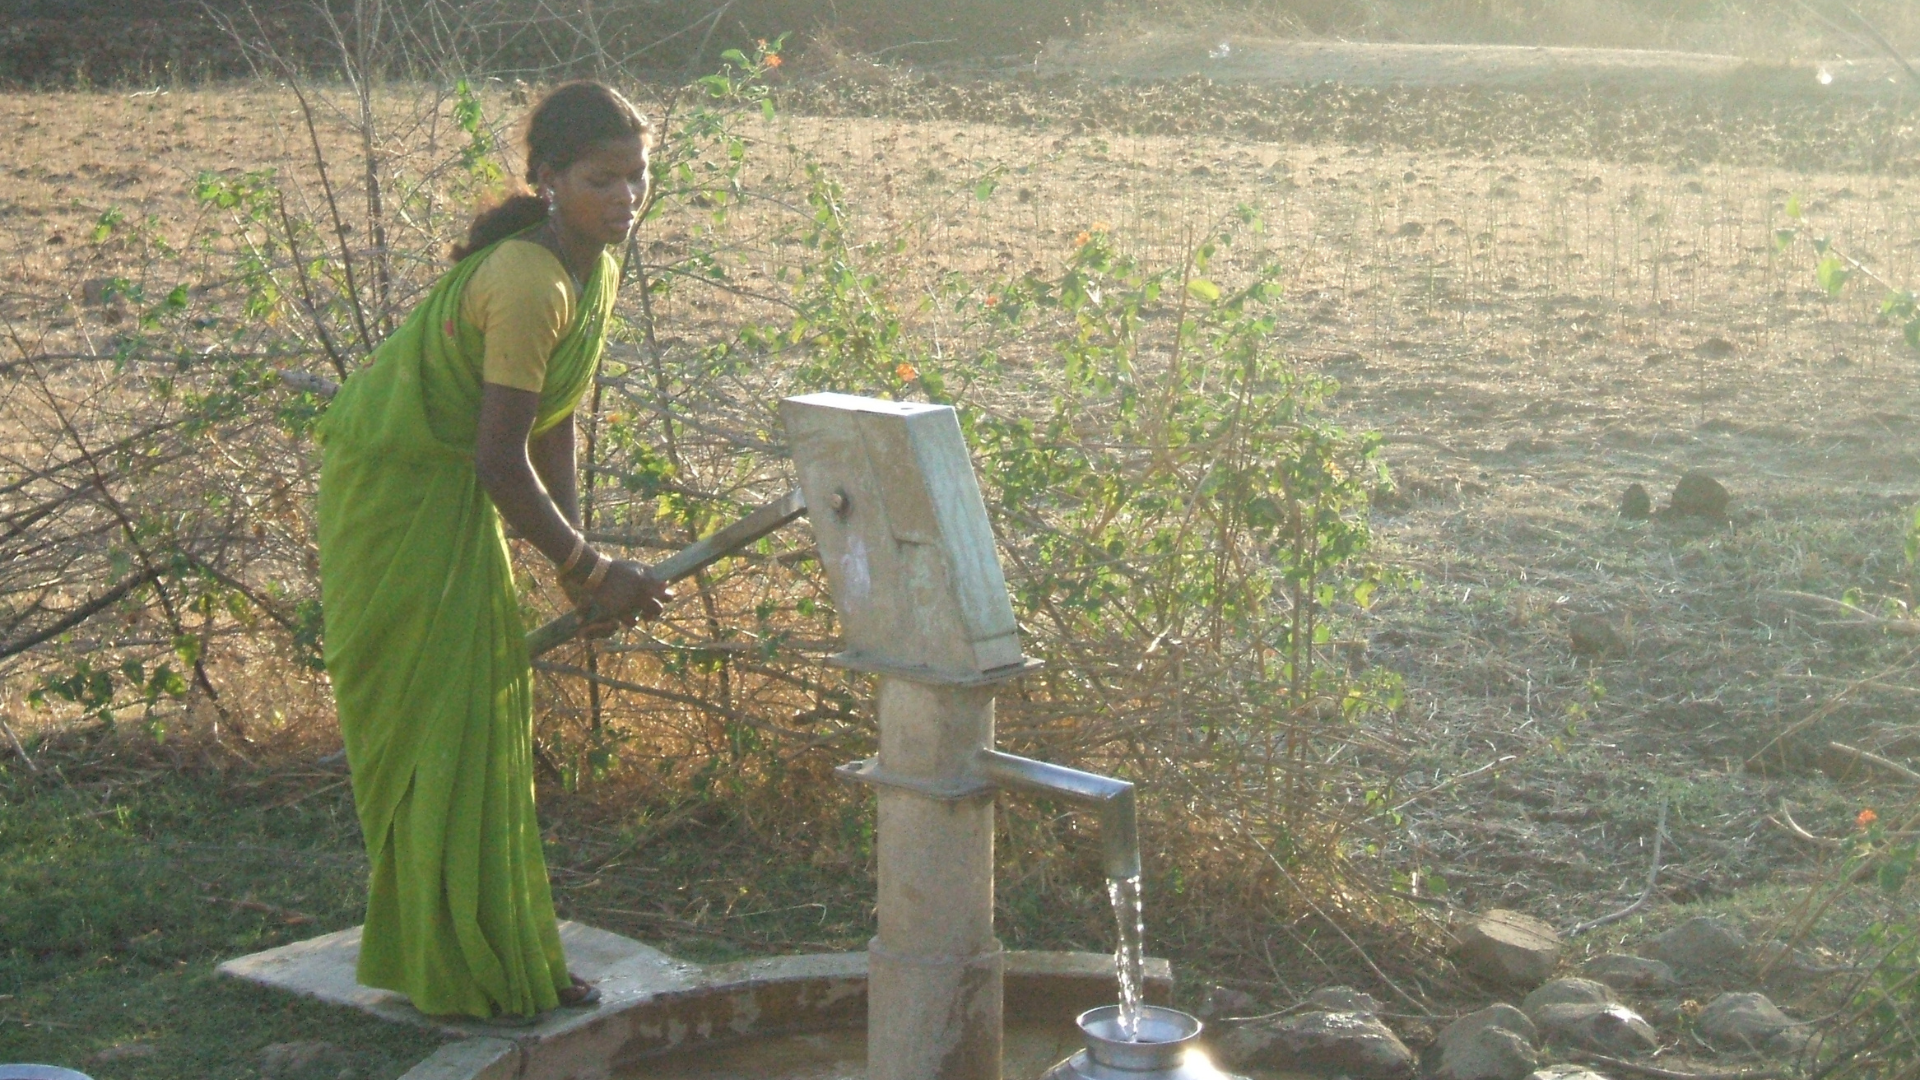 Madhya Pradesh's Groundwater Scenario: Insights from the 2022 Dynamic Groundwater Assessment Report